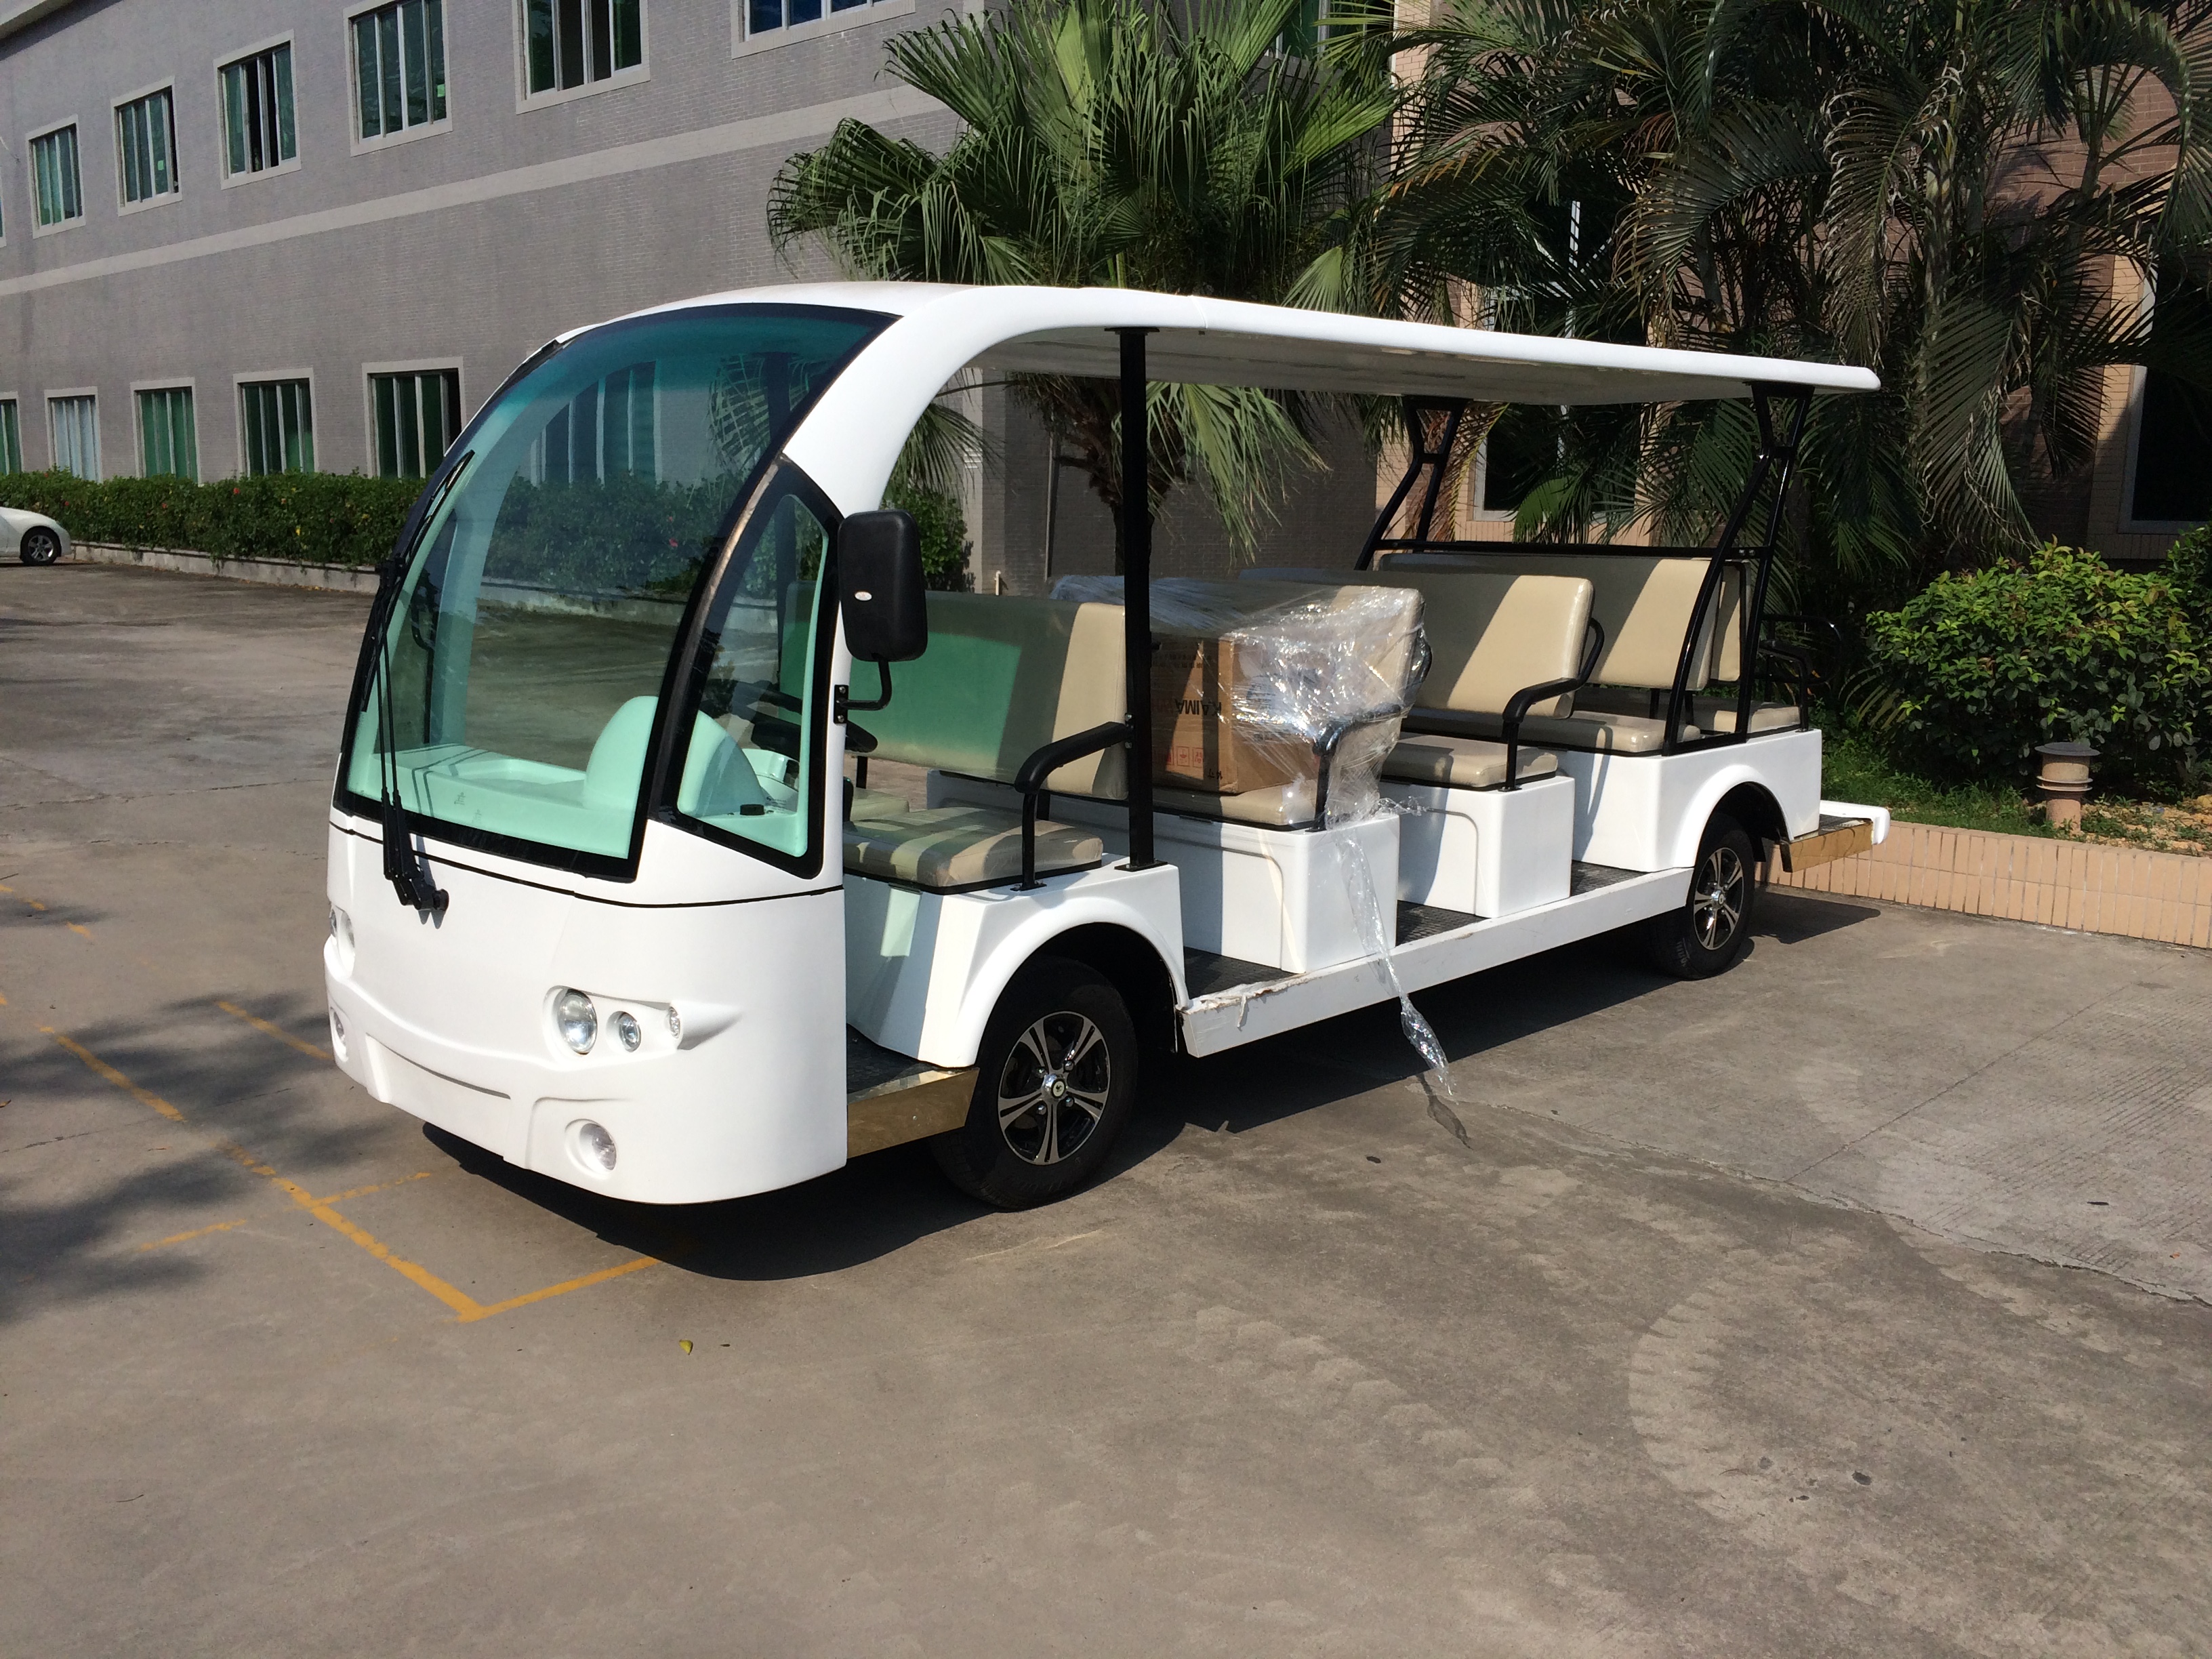 Resort car, leisure vehicle, gas powered carts, sightseeing car, city shuttle vehicle, recreational car, cheap resort car from China, cheap electric shuttle vehicle from China, ECARMAS, Cheap electric cart for shuttle service